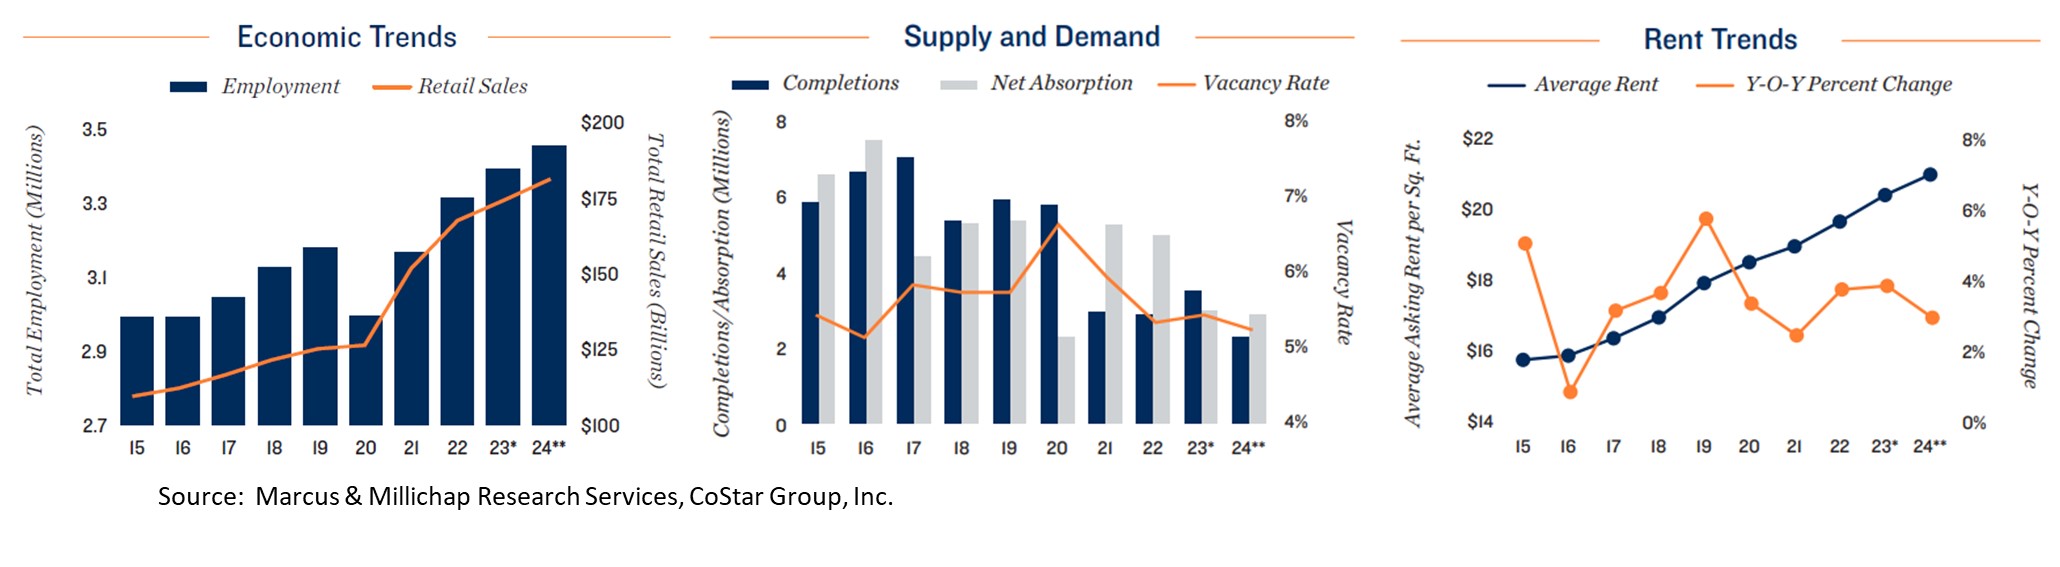 Houston market Economic Trends, Supply and Demand, and Rent Trends charts